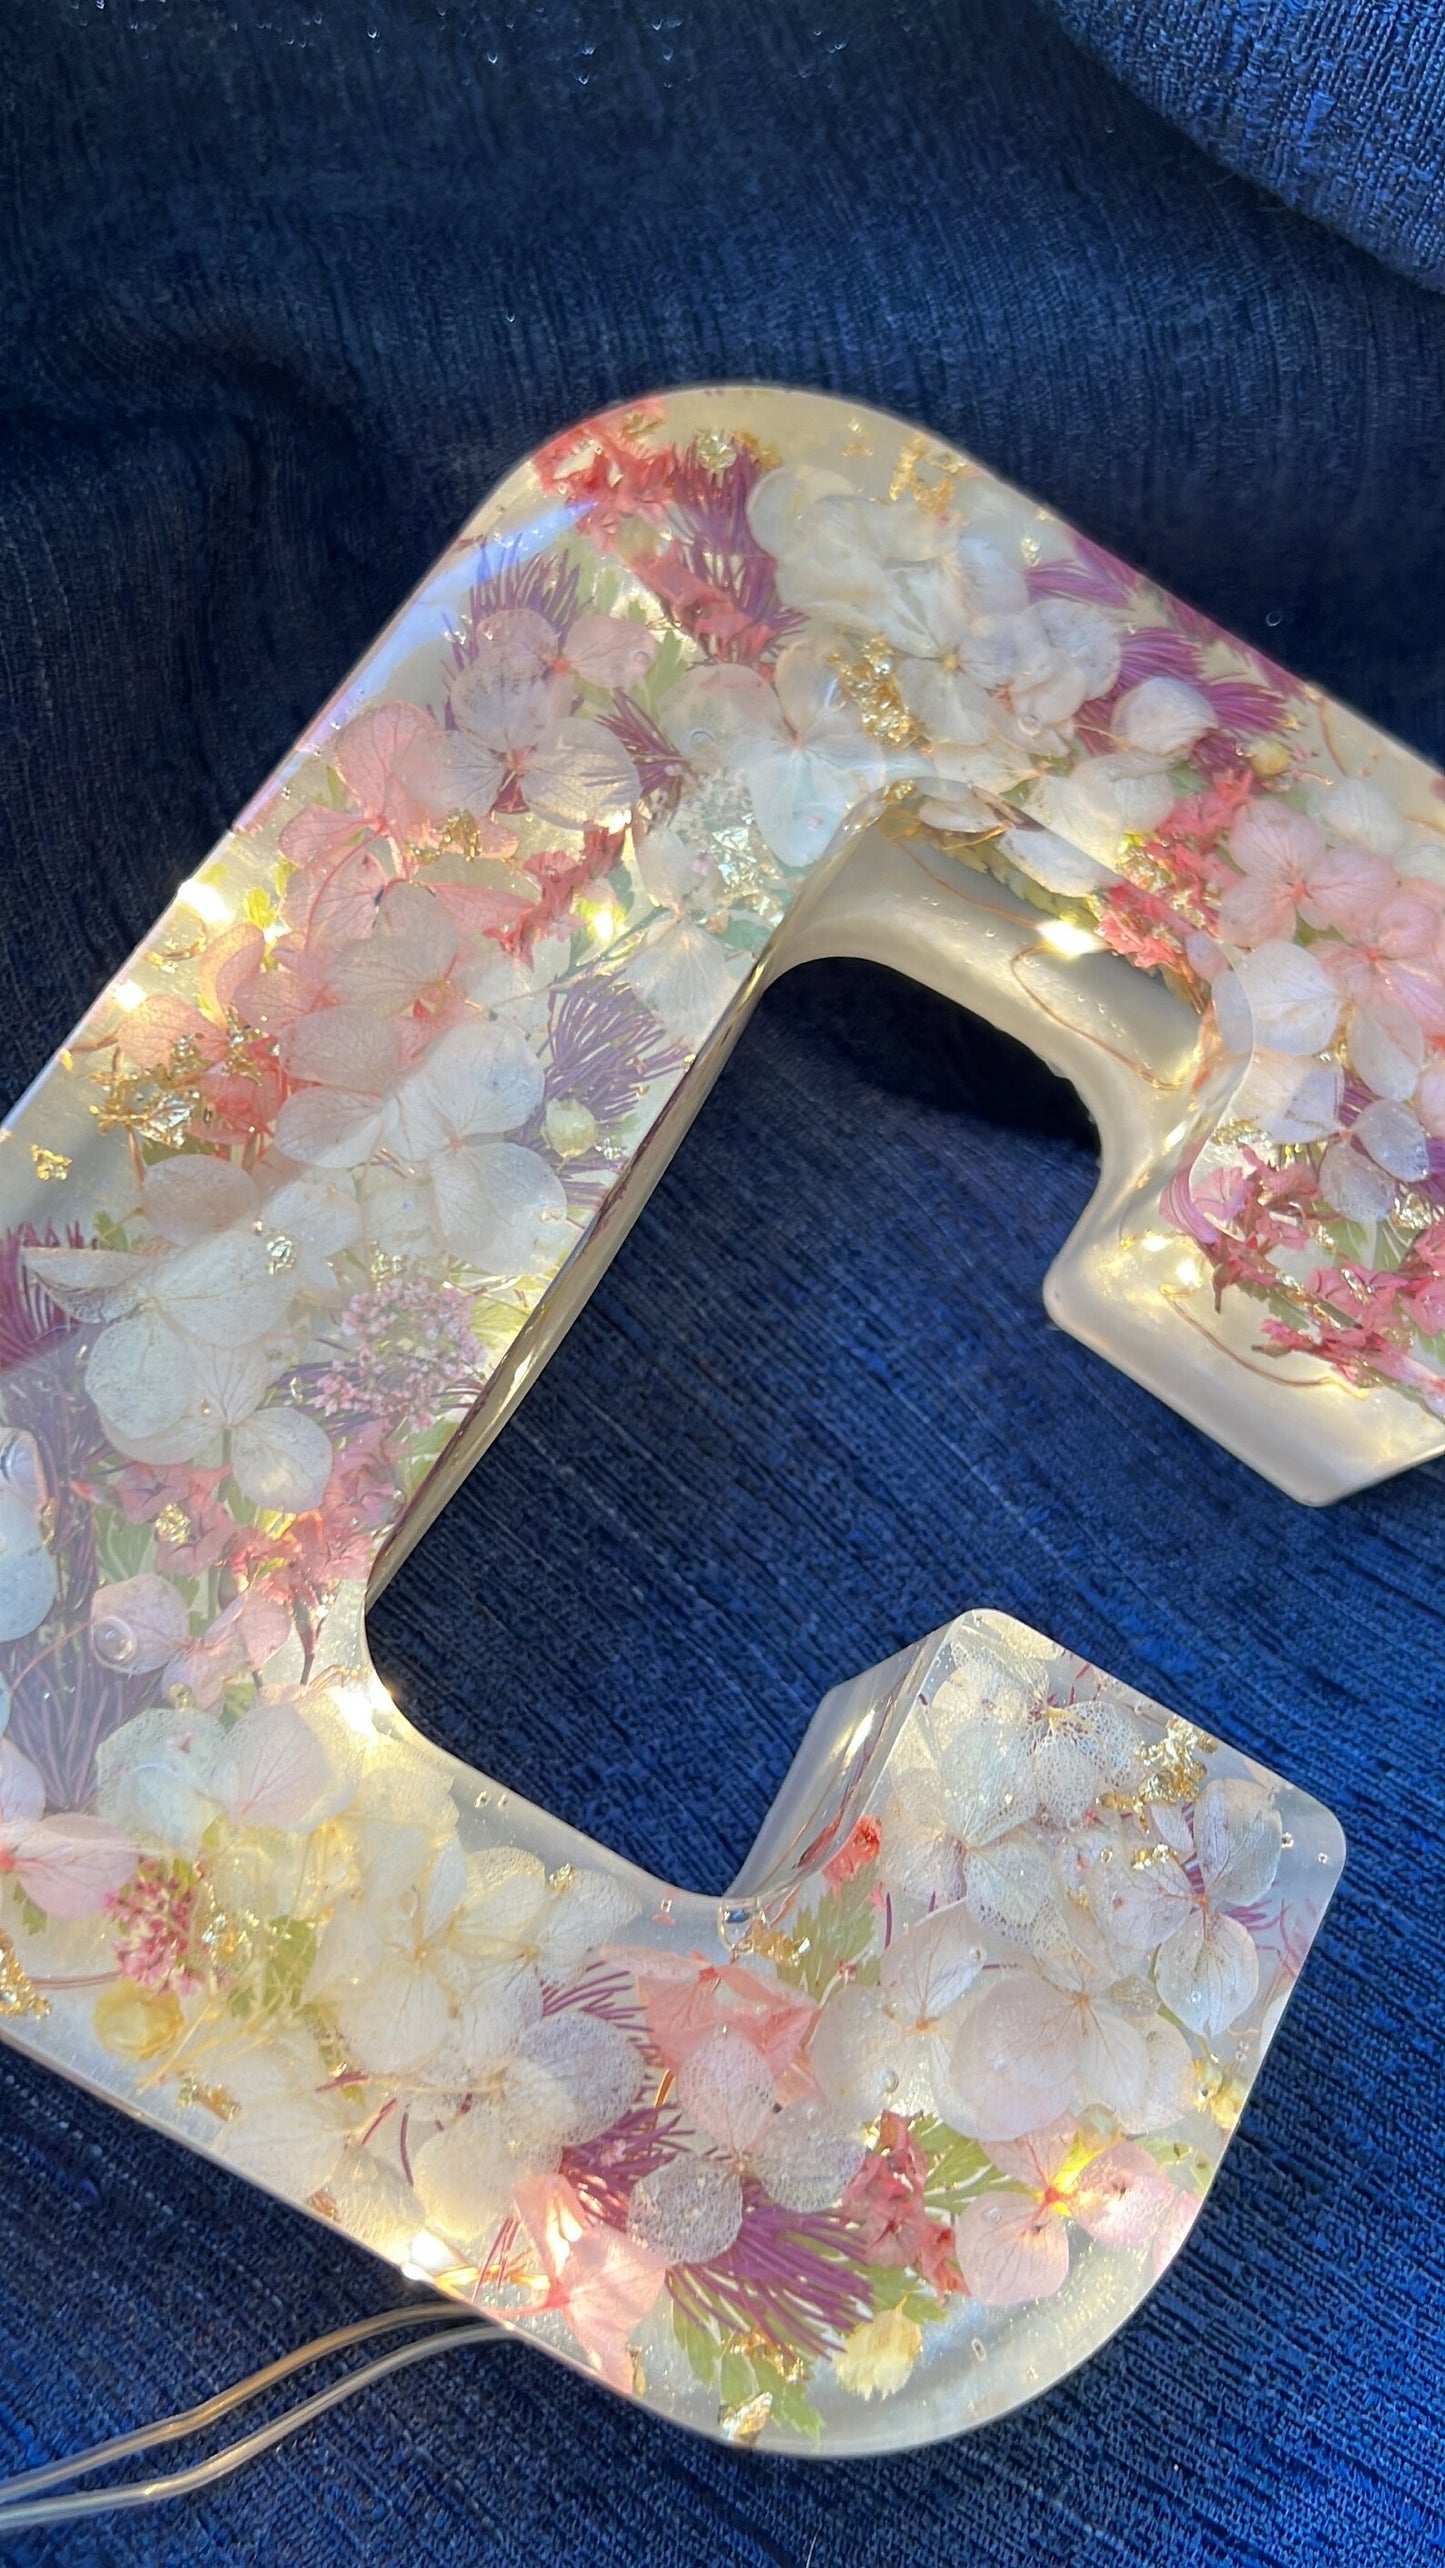 Personalized Resin Letters with Real Flowers and Fairy Lights - Made to Order